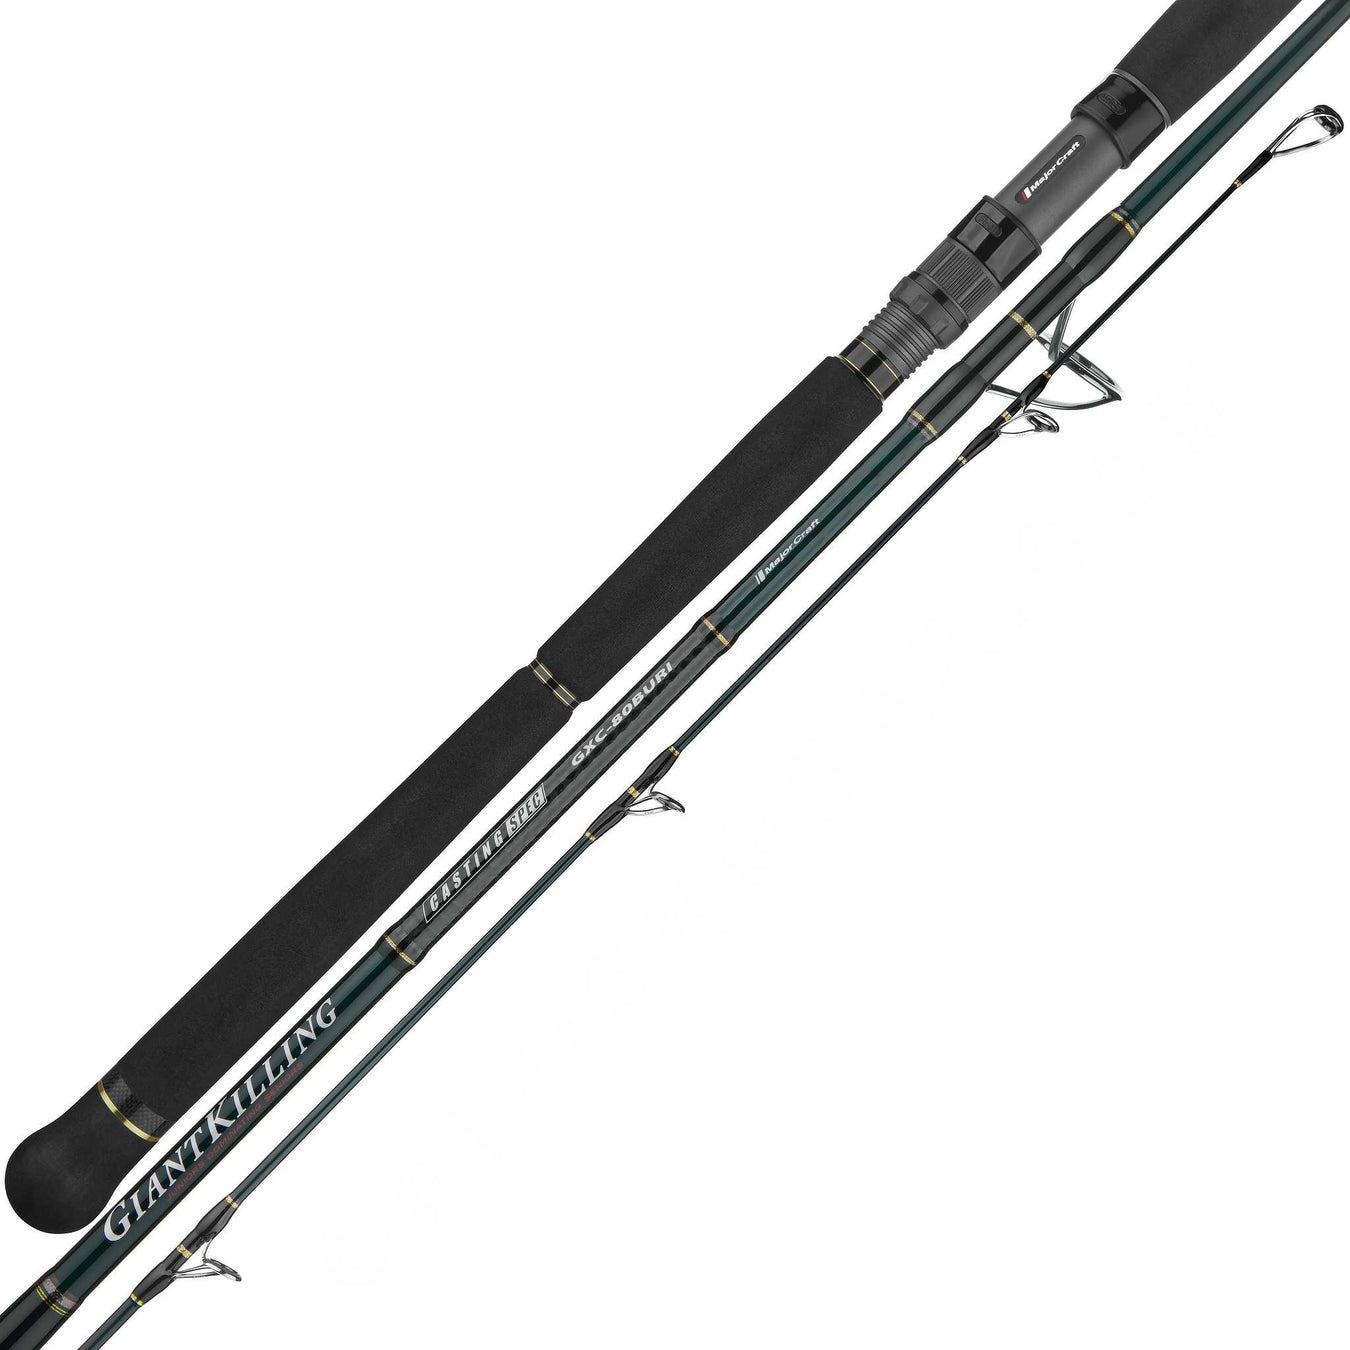 Offshore Rods